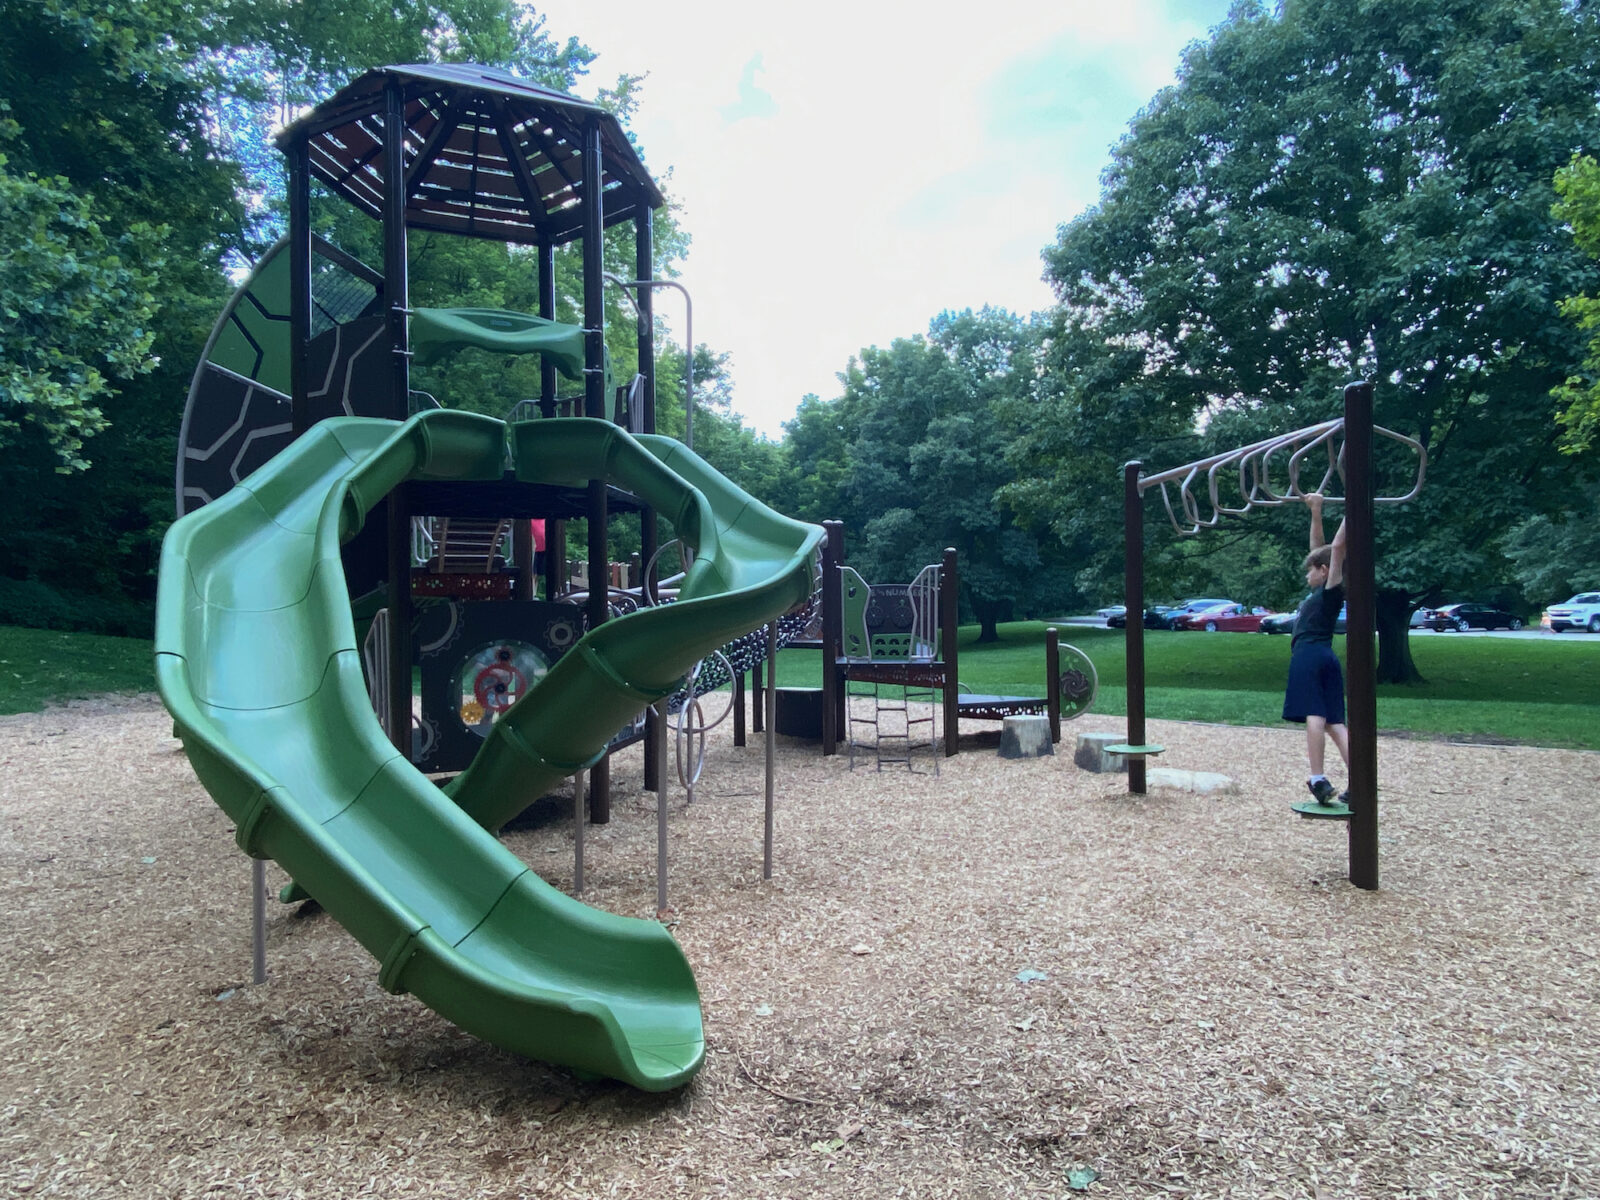 Playground at the Indian Ridge Area of Battelle Darby Creek Metro Park.